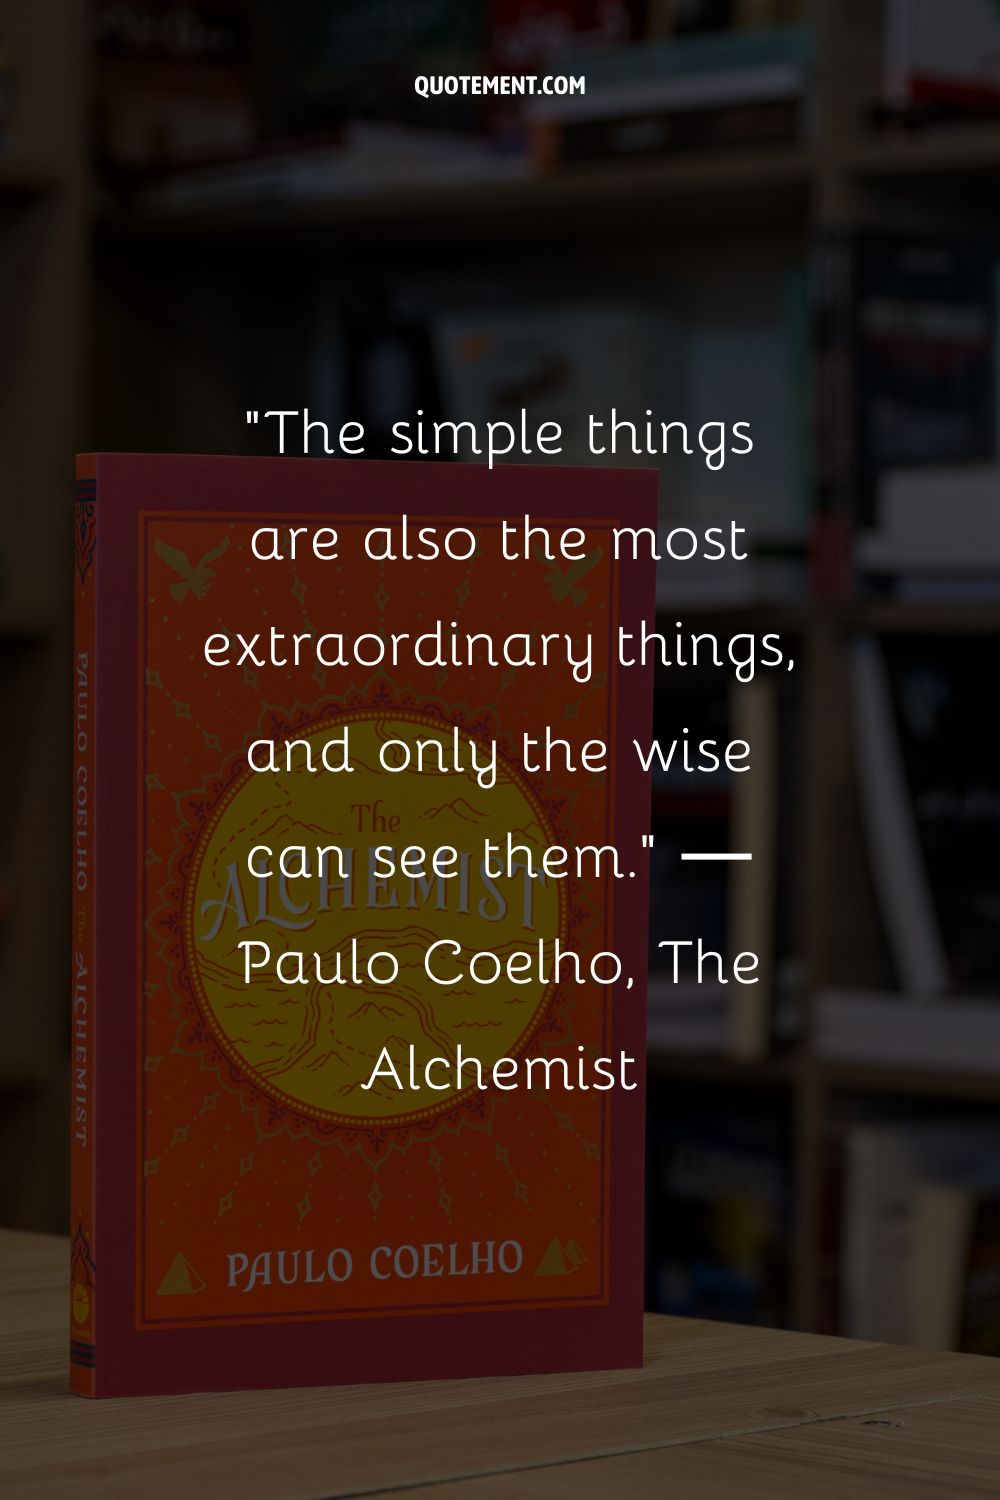 The simple things are also the most extraordinary things, and only the wise can see them